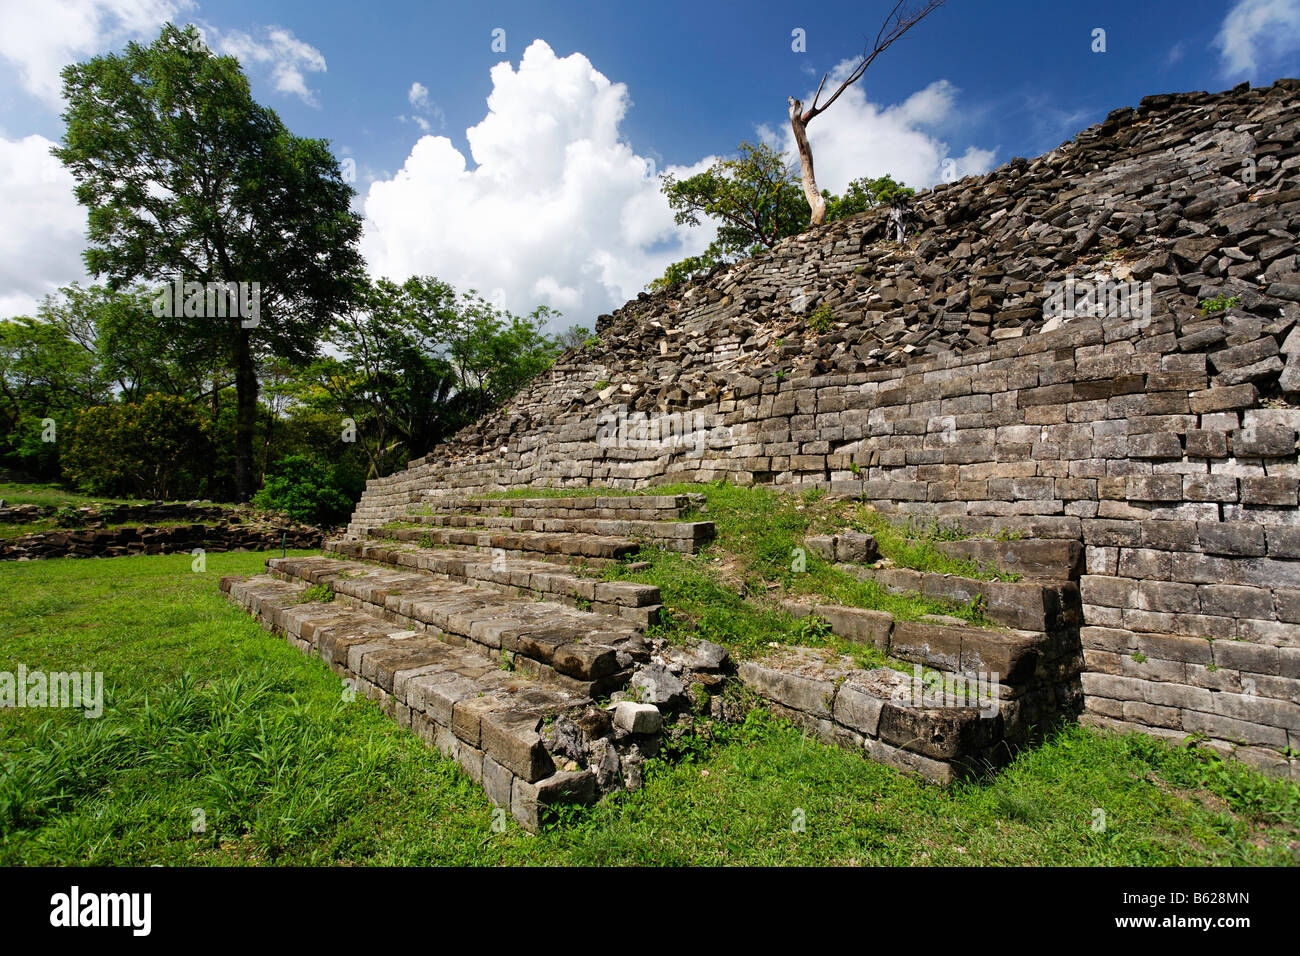 Lubaantun Mayan ruins, buildings without cement, Punta Gorda, Belize, Central America, Caribbean Stock Photo